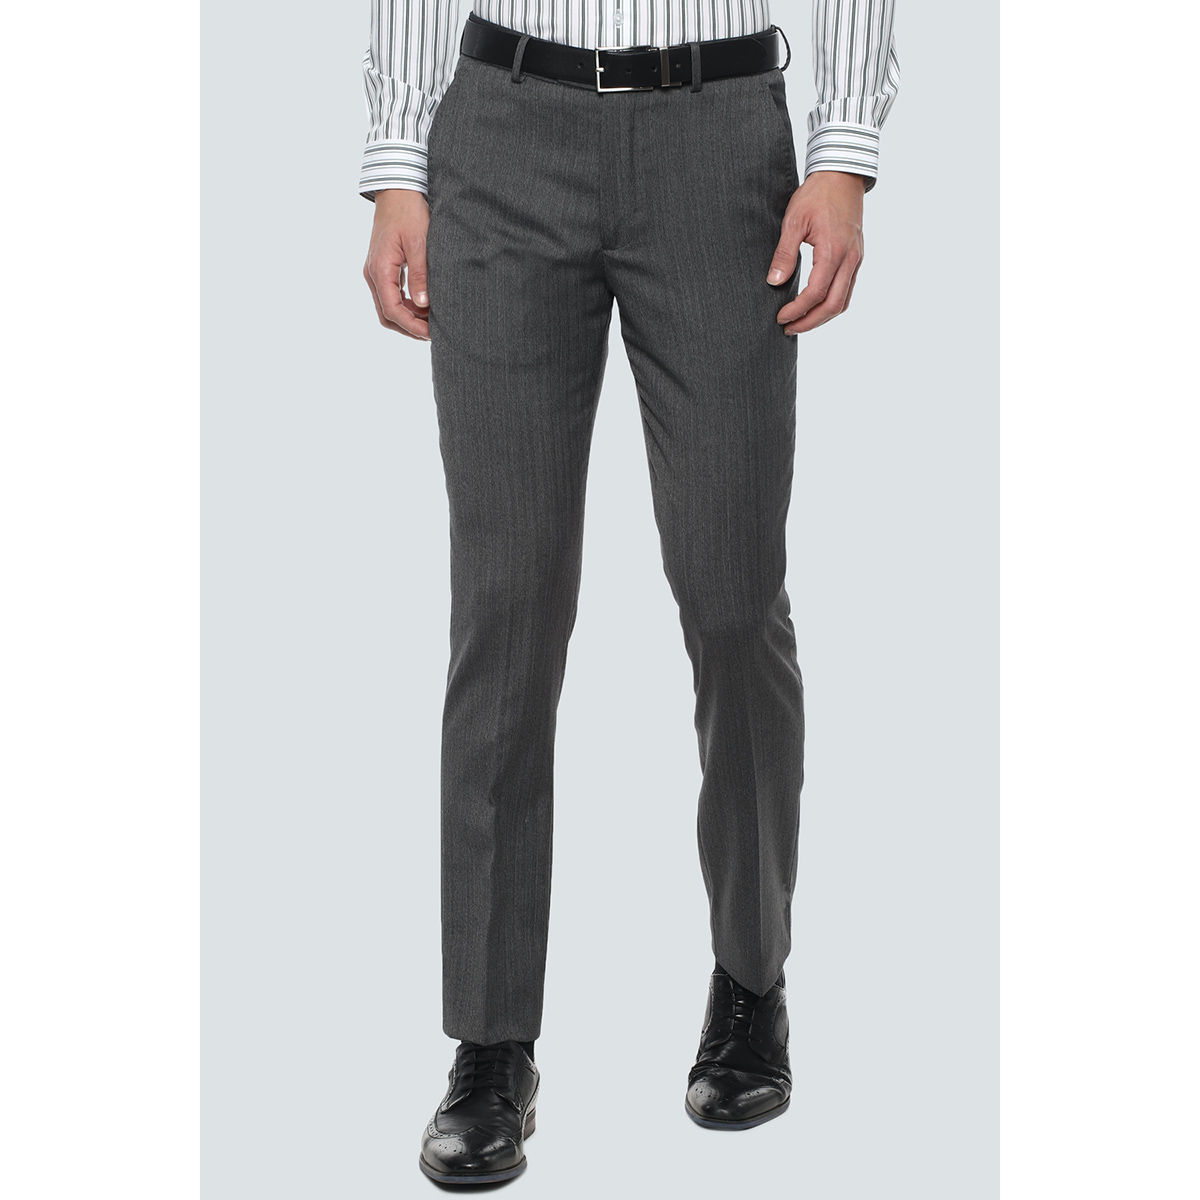 Louis Philippe Grey Formal Trouser Buy Louis Philippe Grey Formal Trouser  Online at Best Price in India  NykaaMan